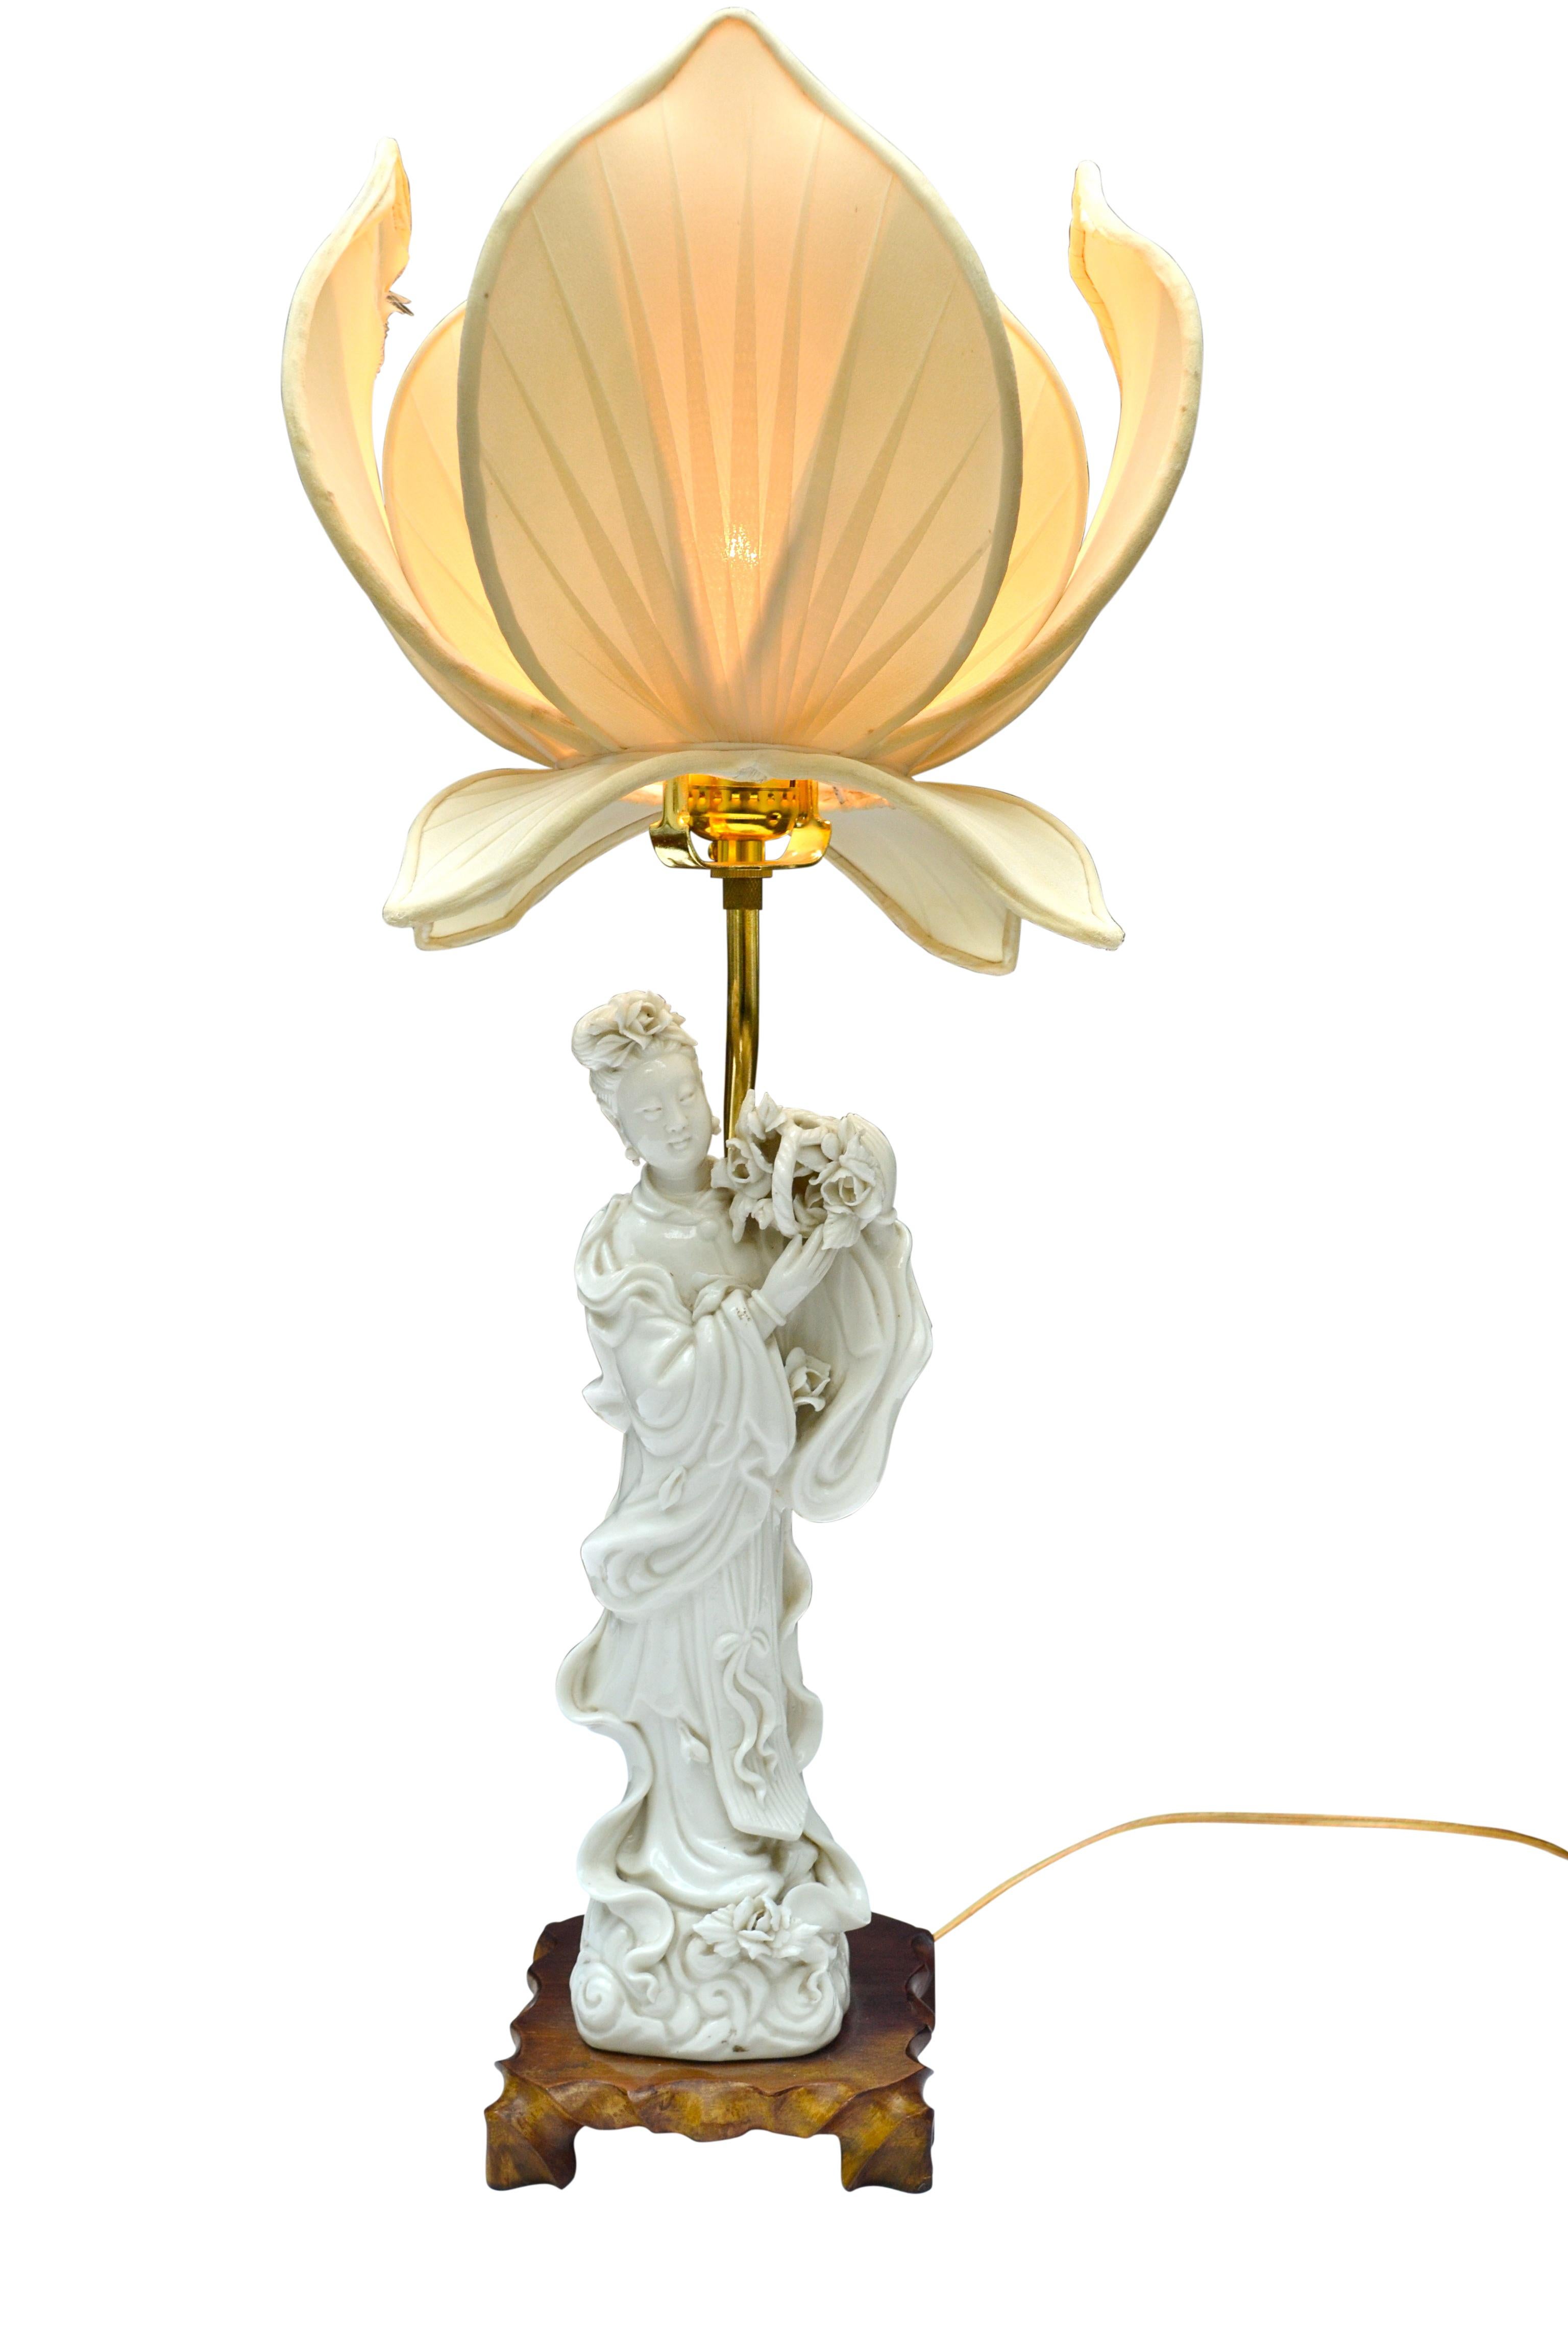 A Blanc De Chine lamp depicting a standing figure Quan Yin holding aloft a basket of roses set on a wooden base and featuring a unique original silk shade in the shape of a lotus flower.
  